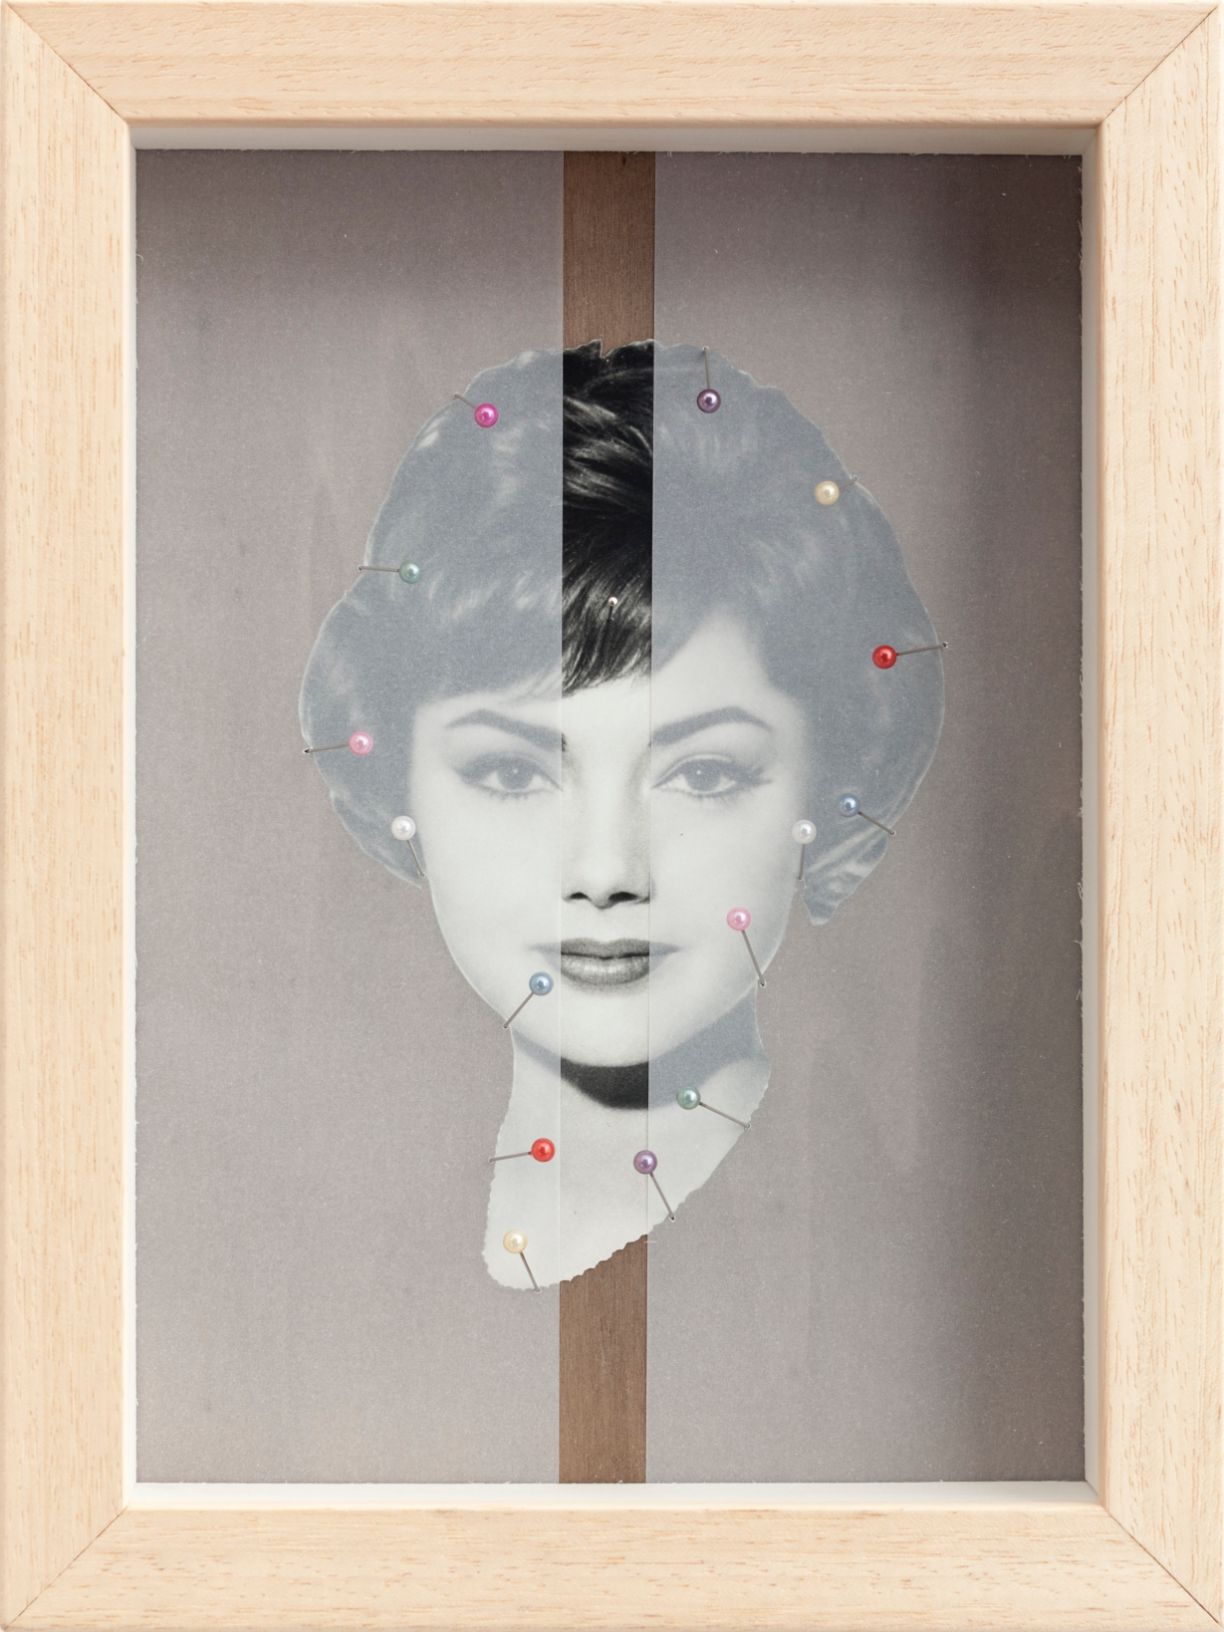 2013, vintage photos, pins and tracing paper, in wooden box frame, 26 x 19,5 x 5,5 cm